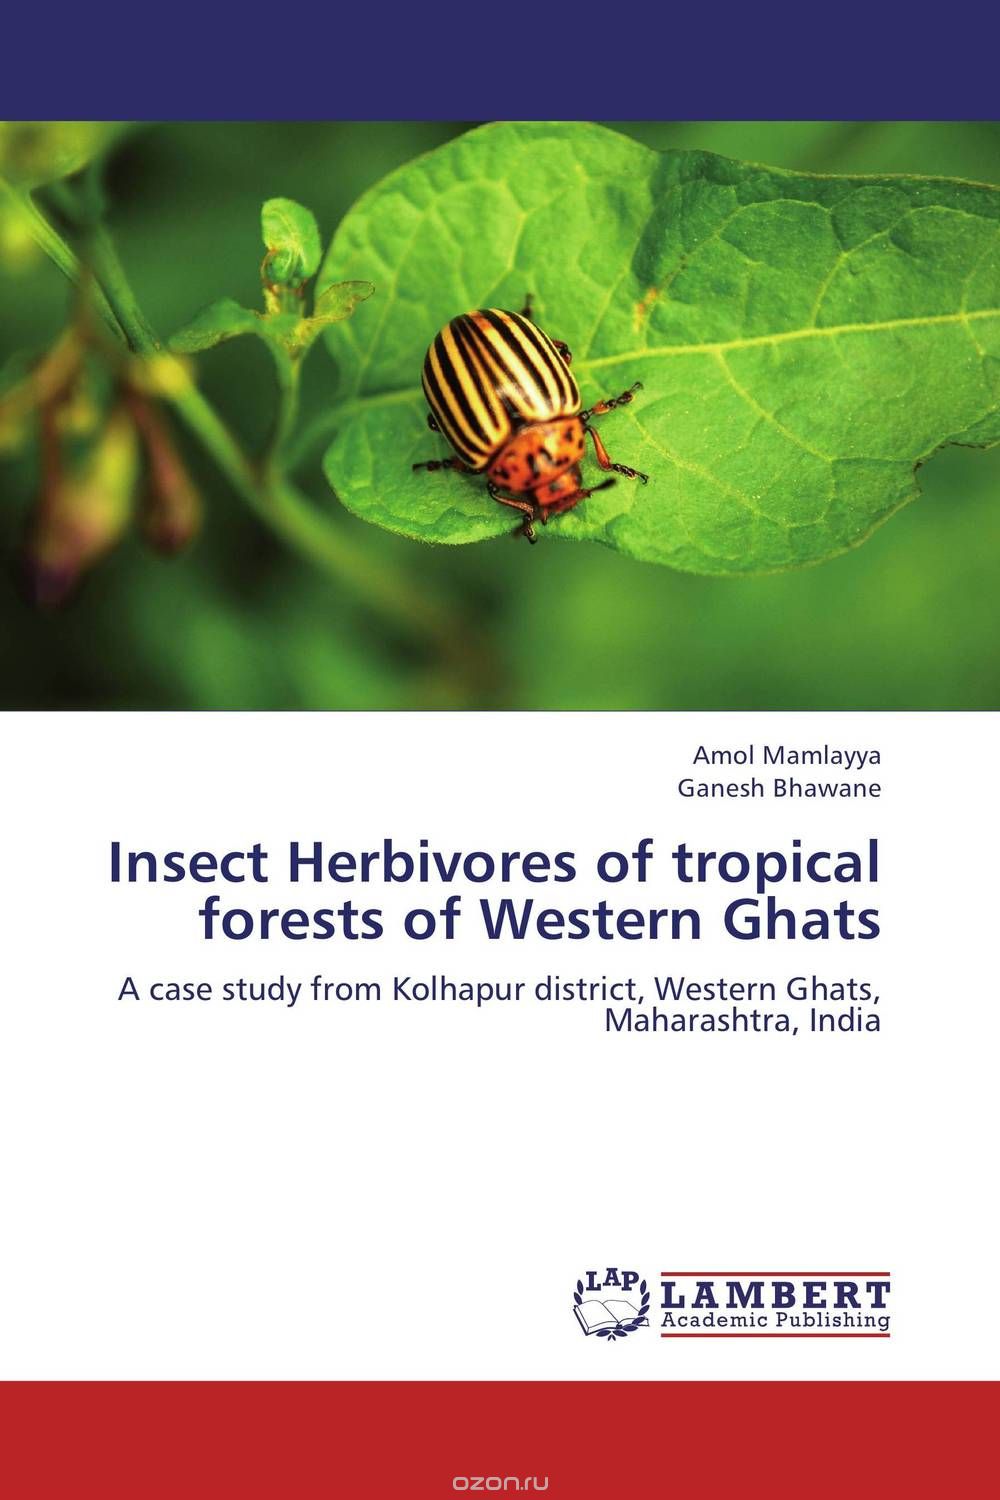 Скачать книгу "Insect Herbivores of tropical forests of Western Ghats"